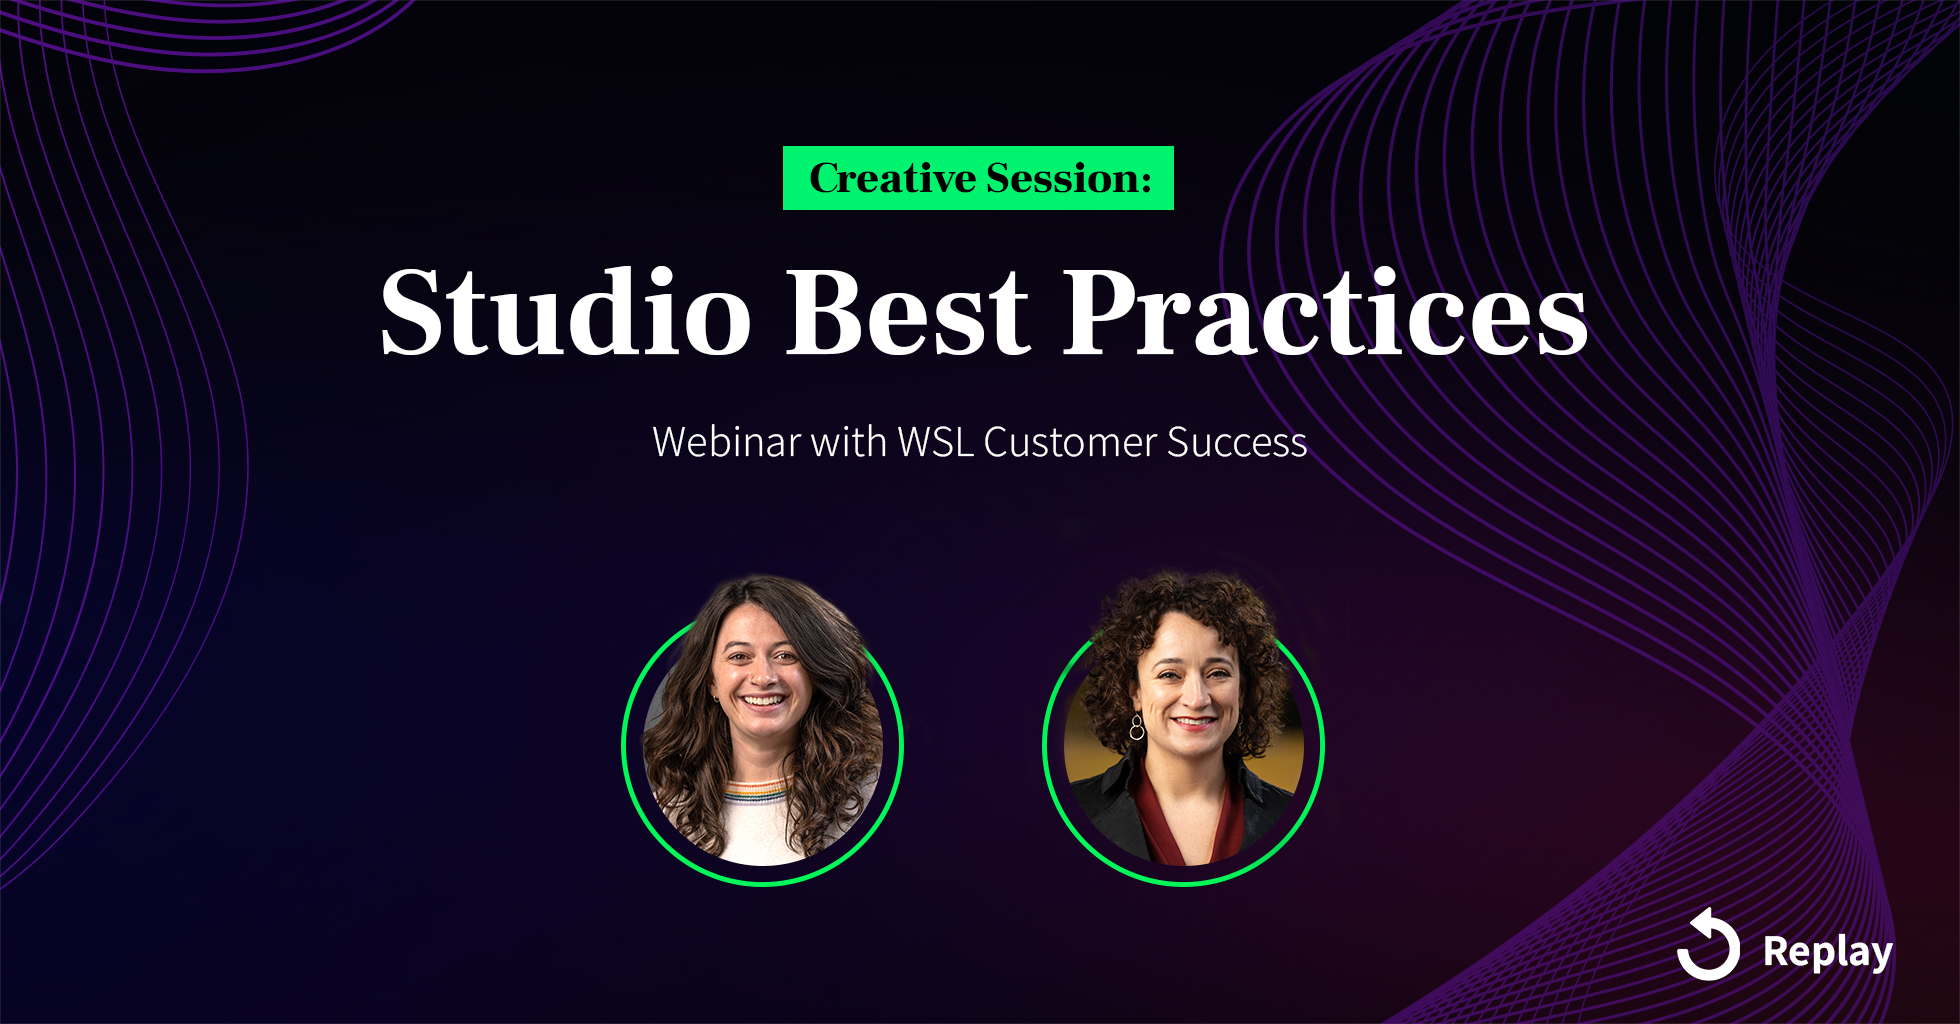 Learn best practices for WSL Studio with our product expert in this creative session.